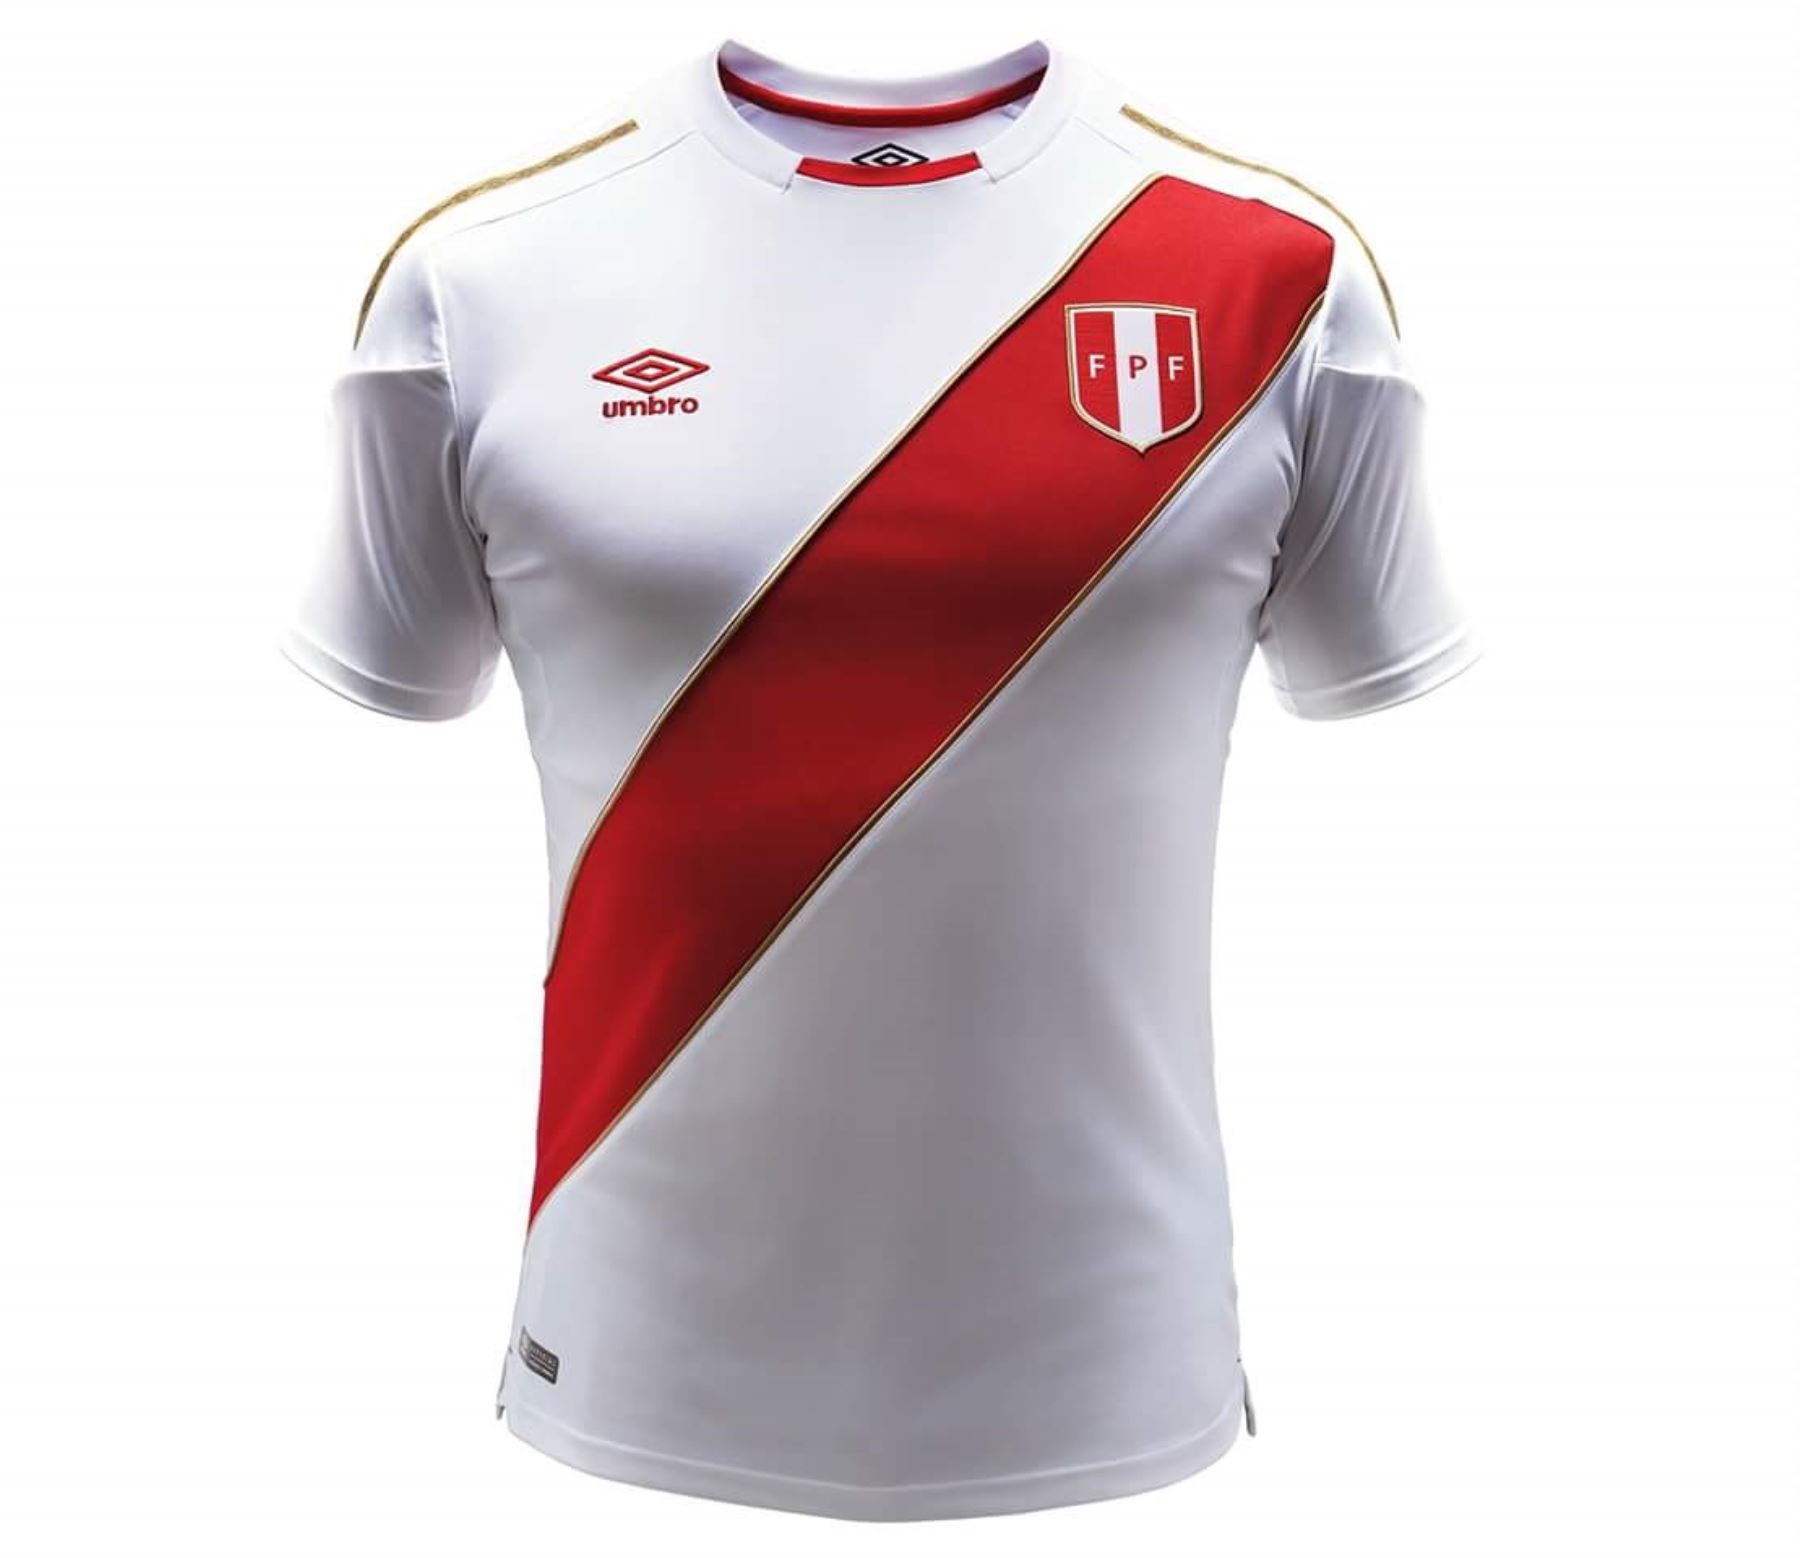 Peru releases new jersey for 2018 World Cup News ANDINA - Pe